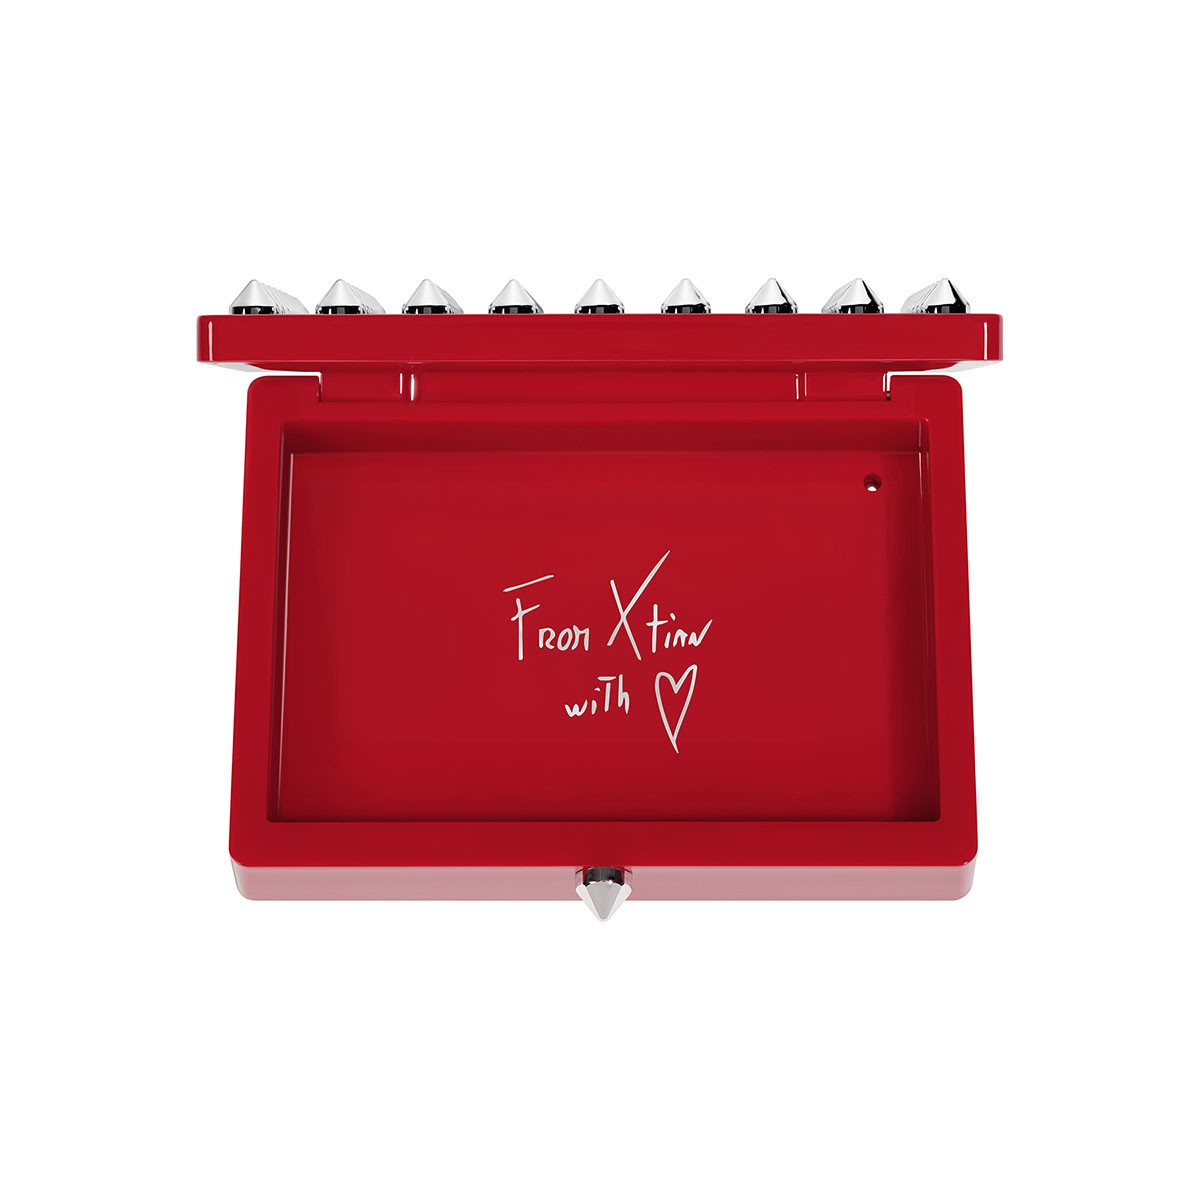 Beauty - Red Case - Christian Louboutin